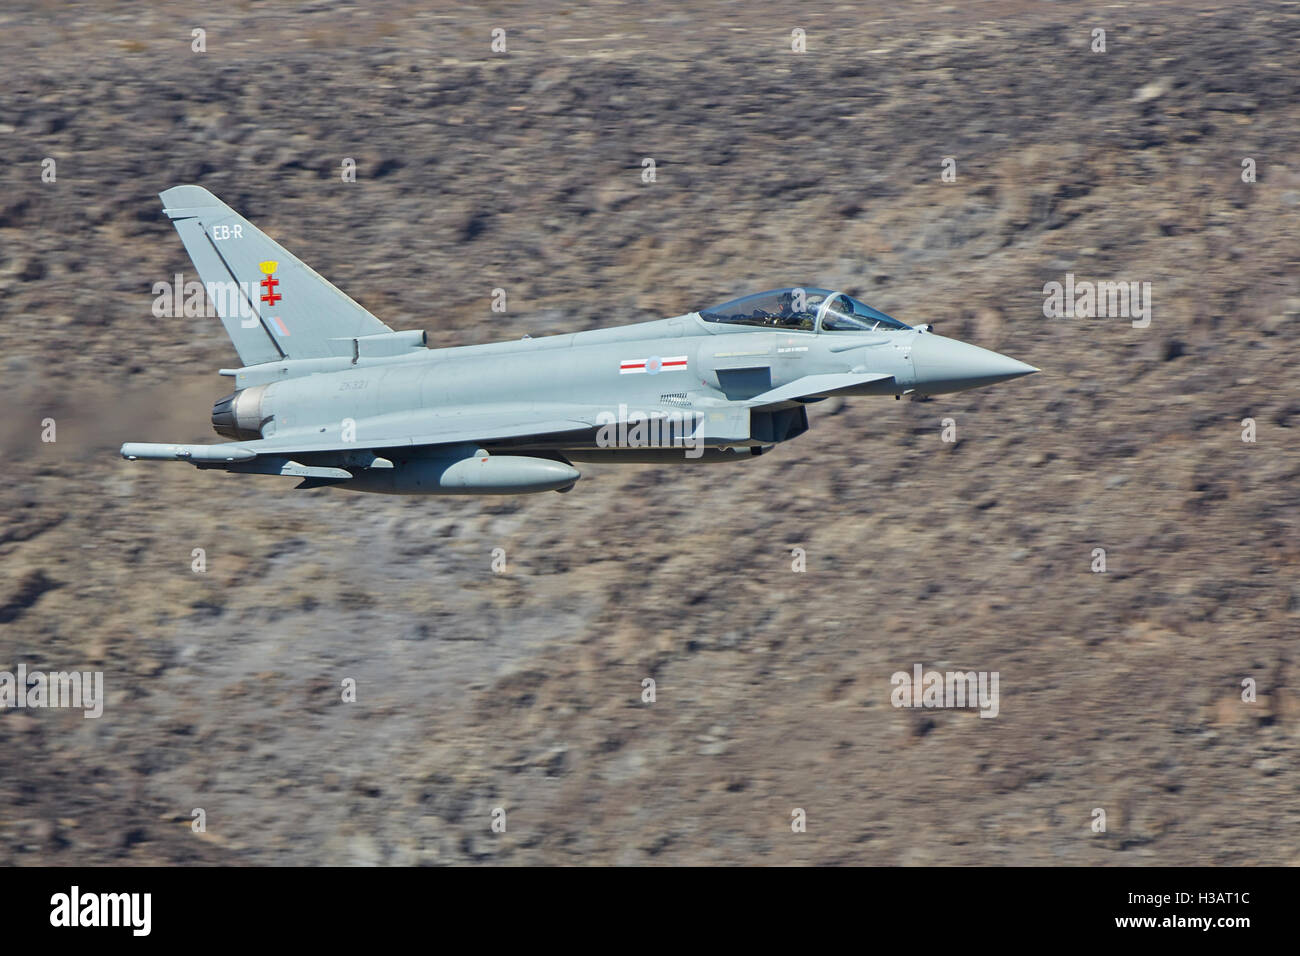 Royal Air Force Typhoon FGR4 Jet Fighter, Flies At Low Level And High Speed Through Rainbow Canyon, California, USA. Stock Photo